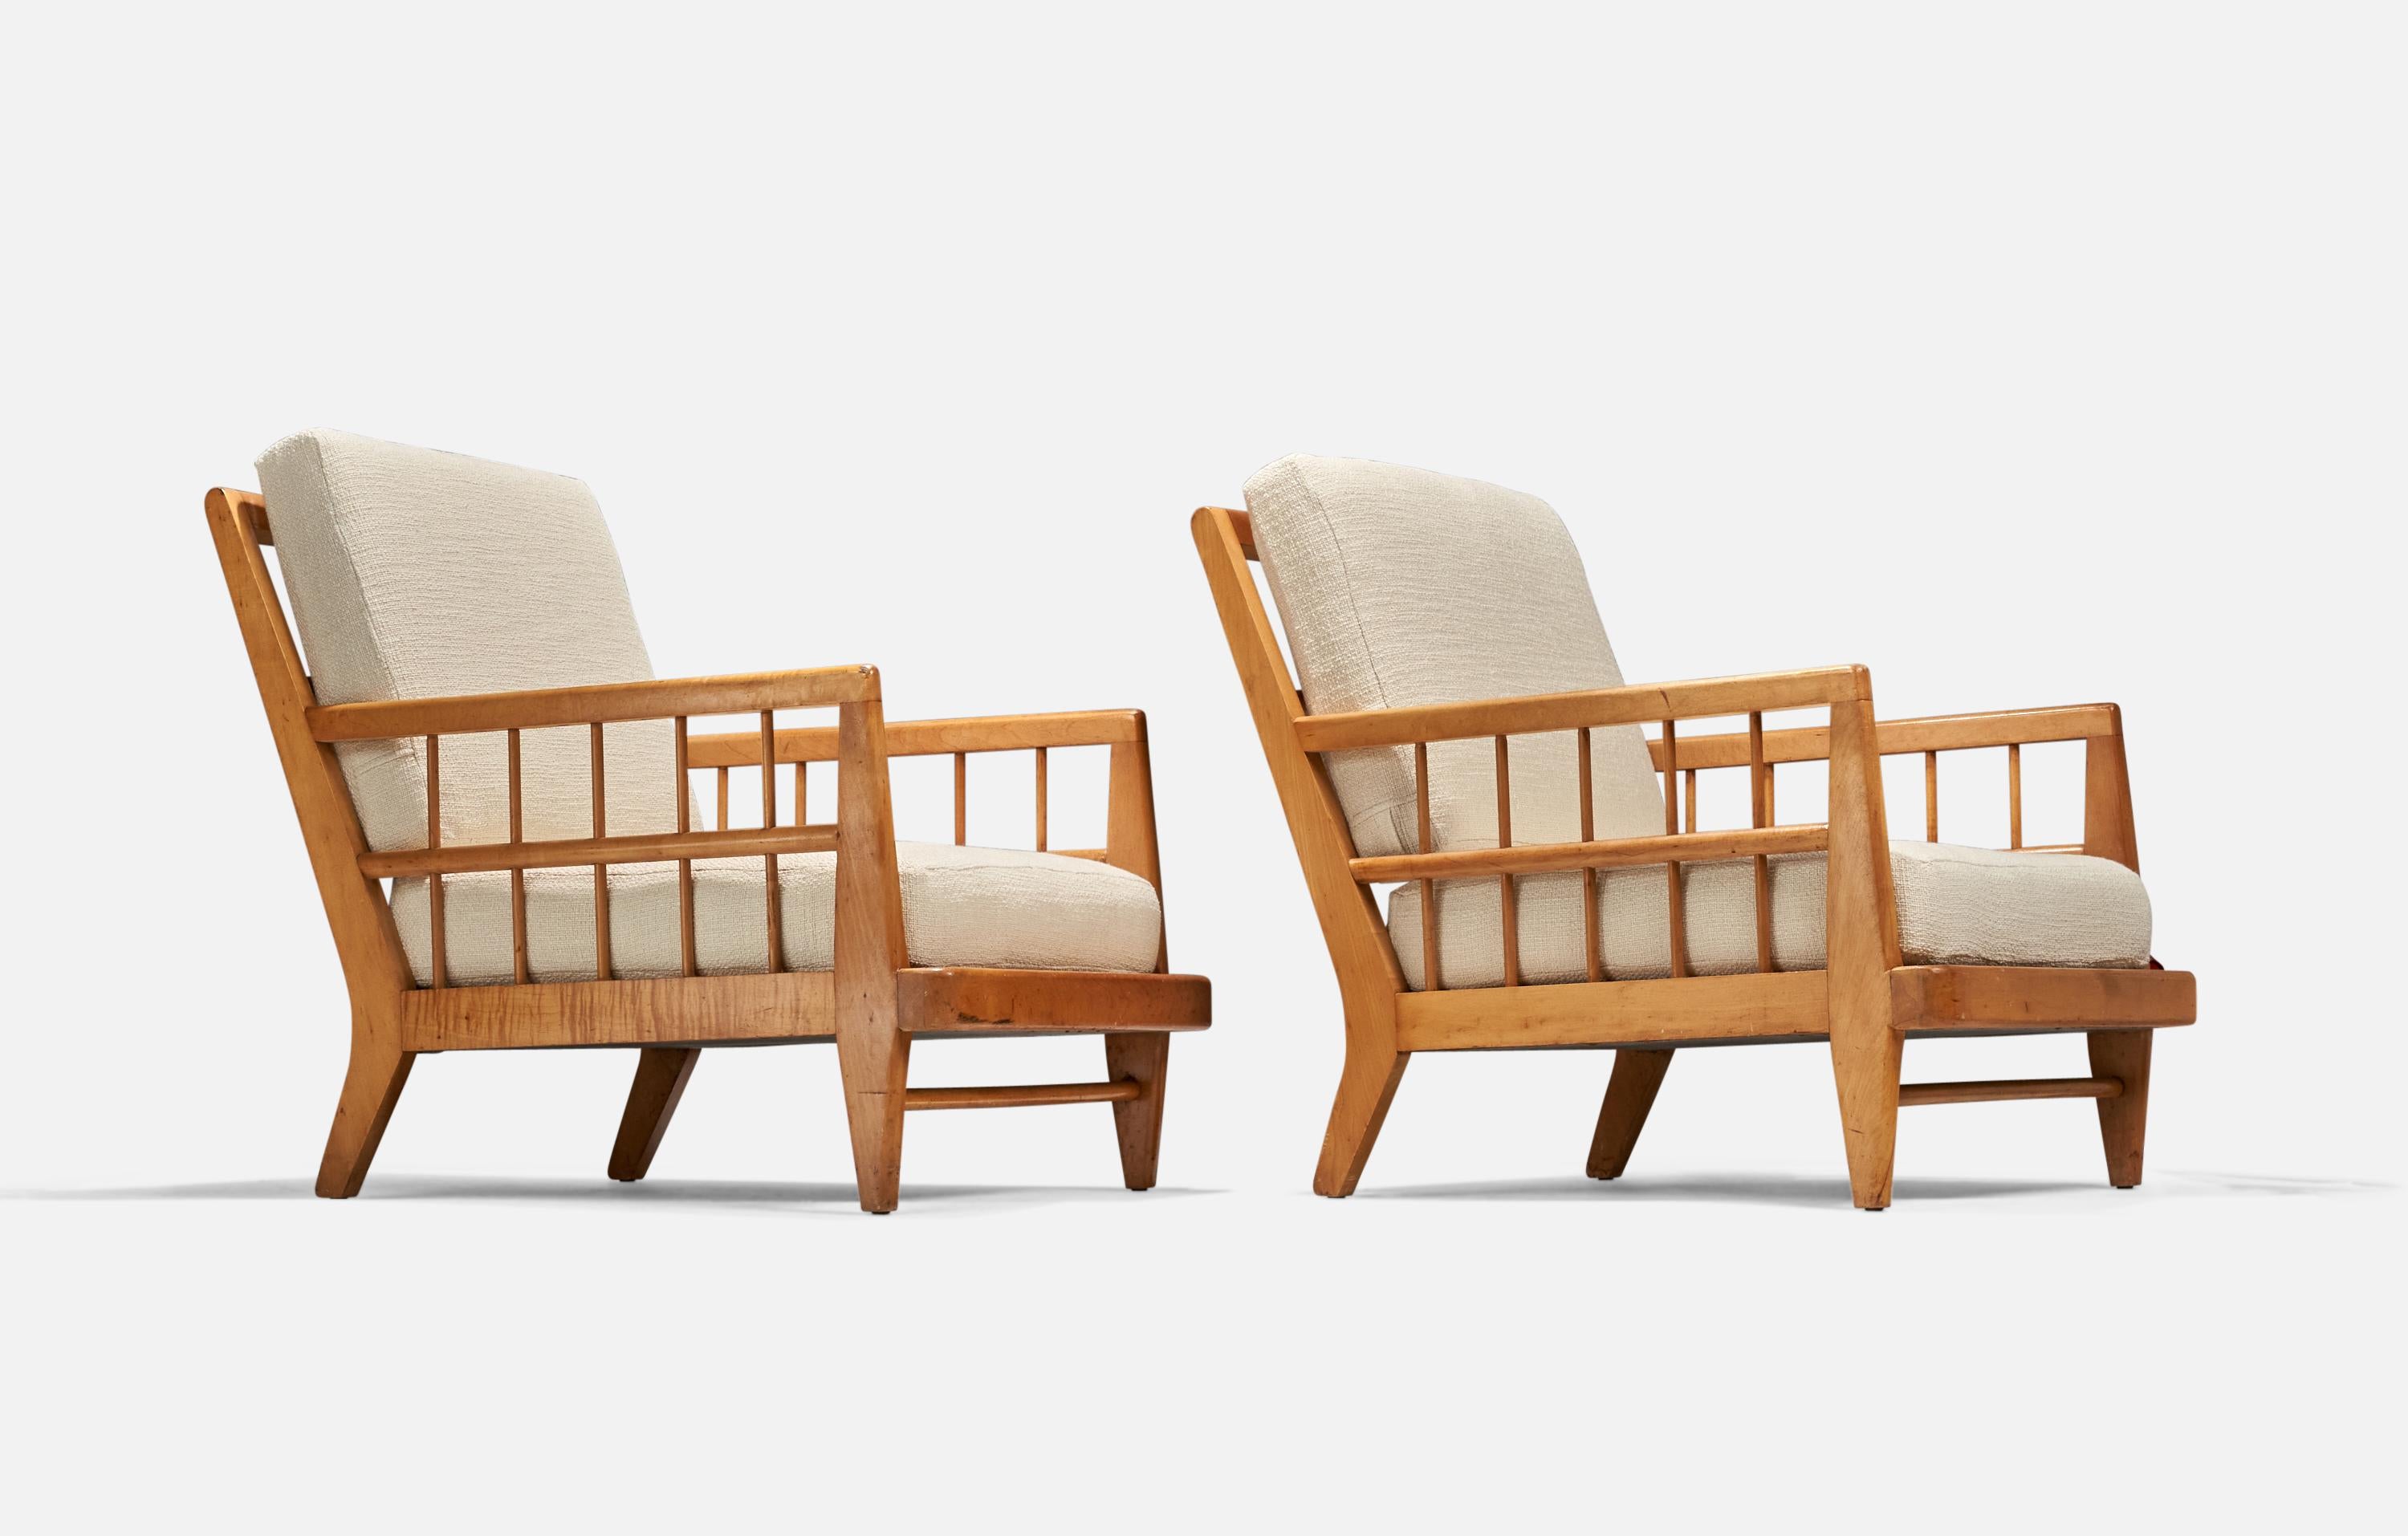 A pair of beech, and white fabric lounge chairs designed by Edward Wormley and produced by Drexel, United States, 1940s.

Measure: seat height (inches) : 14.5.